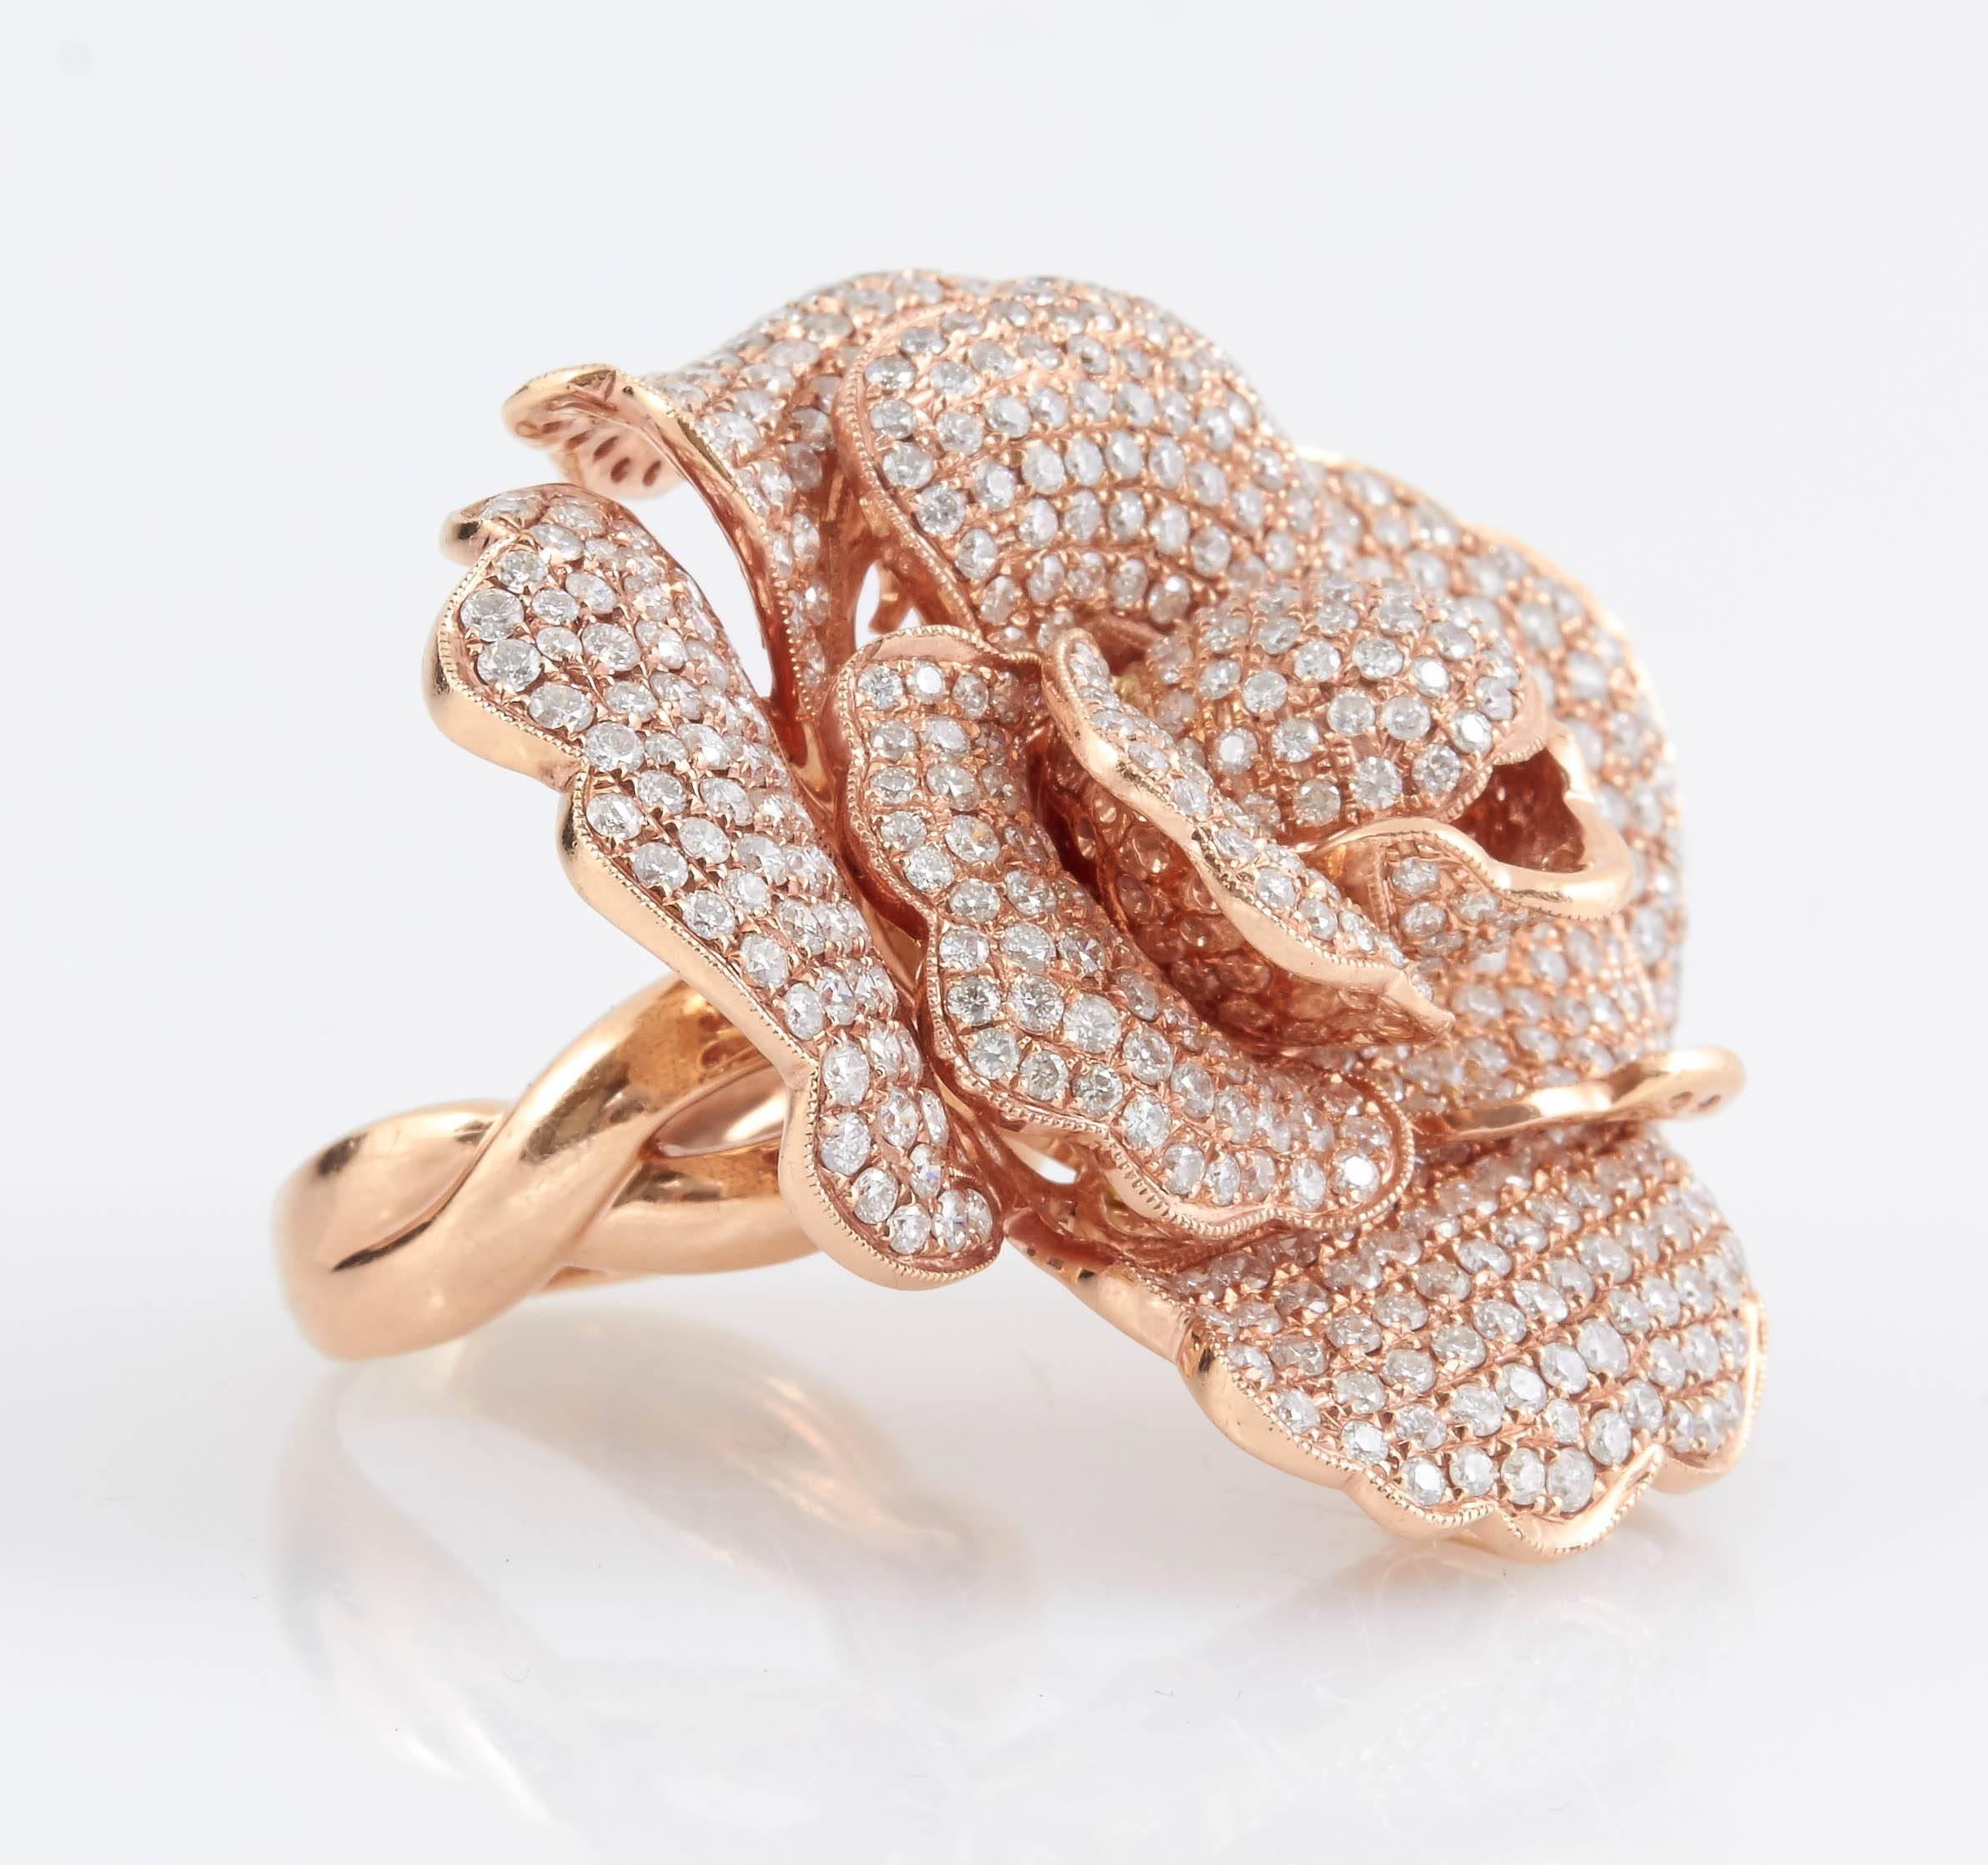 Stunning Pavé Rose diamond ring featuring round cut diamonds, weighing a total of 8.34 carats, finely crafted in 14K rose gold. This ring has a removable shank to wear the rose as a pendant. 
